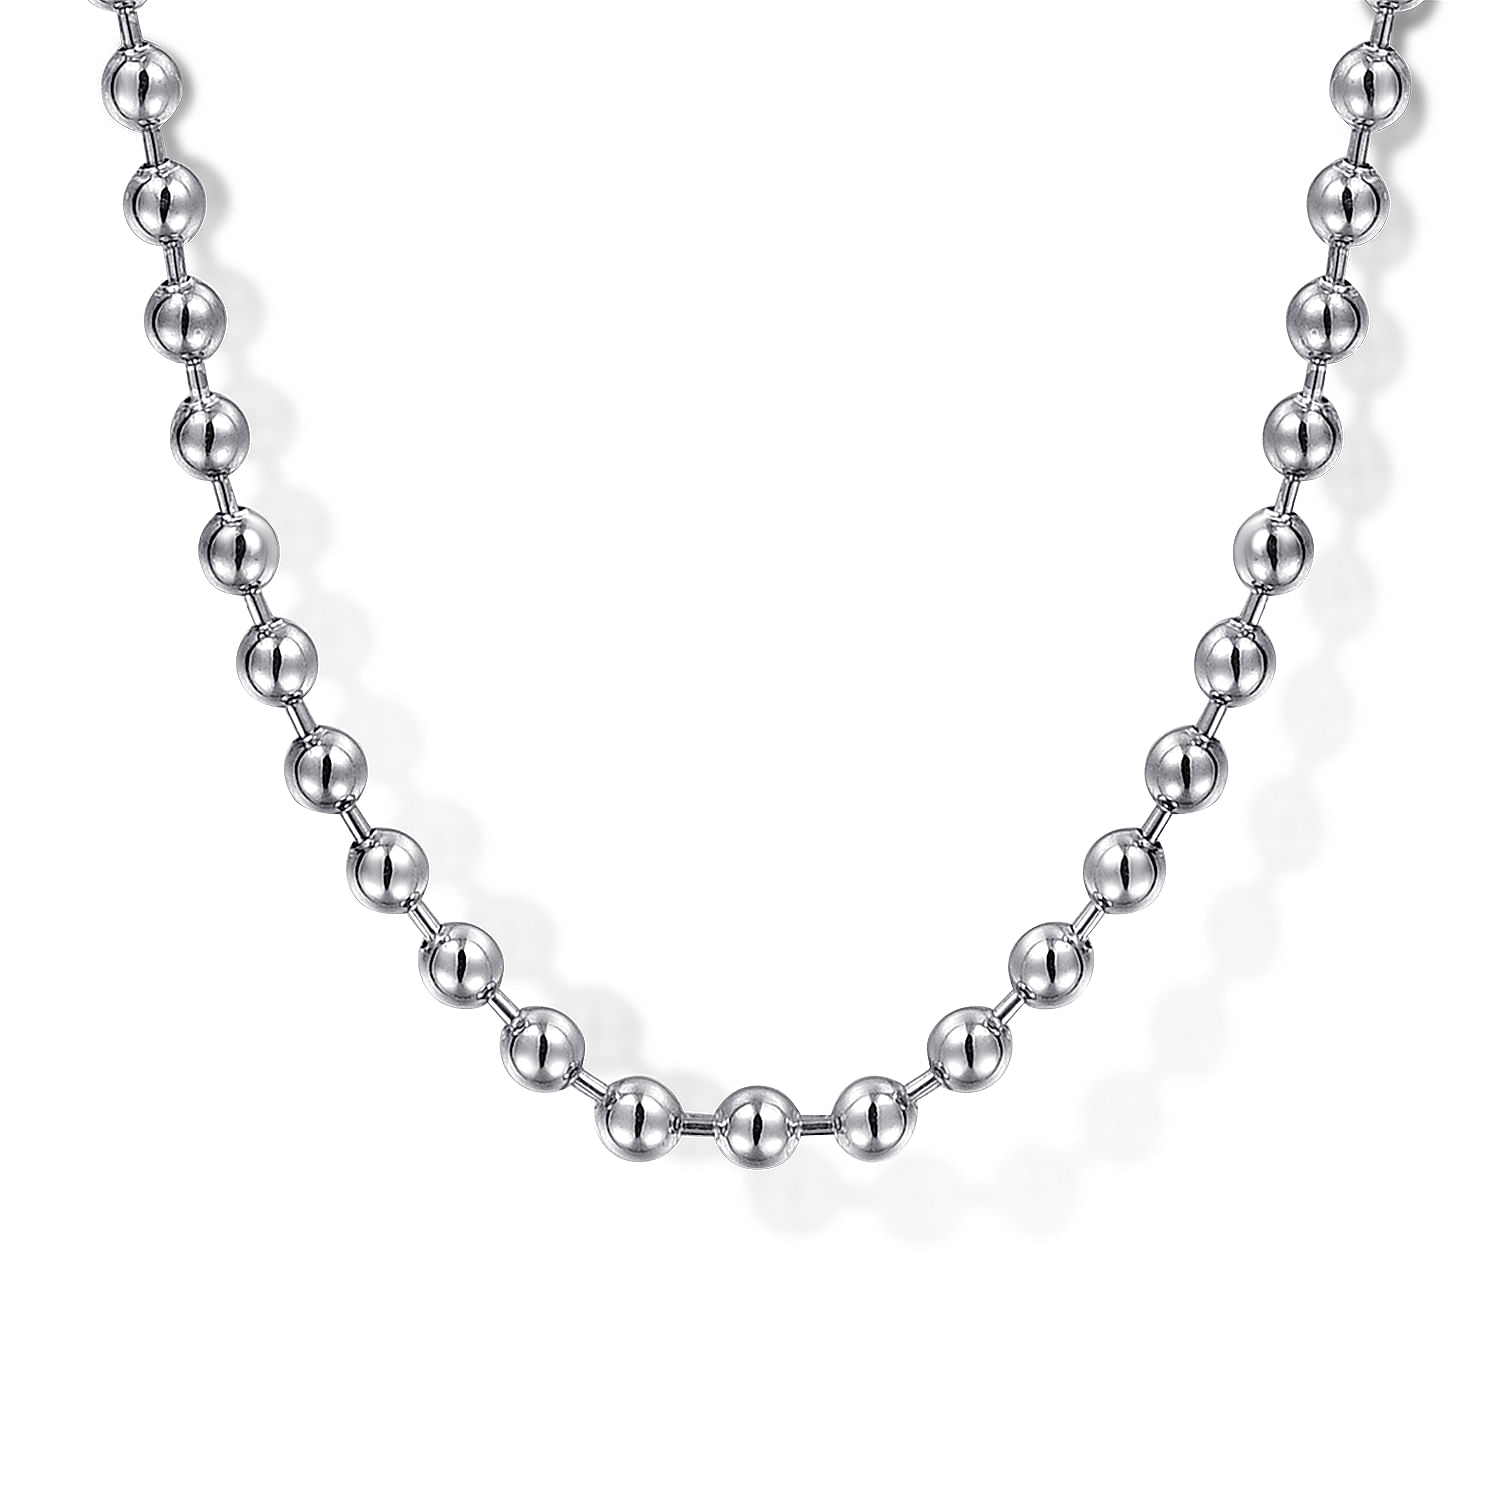 20 Inch 14K White Gold 3mm Ball Chain Necklace